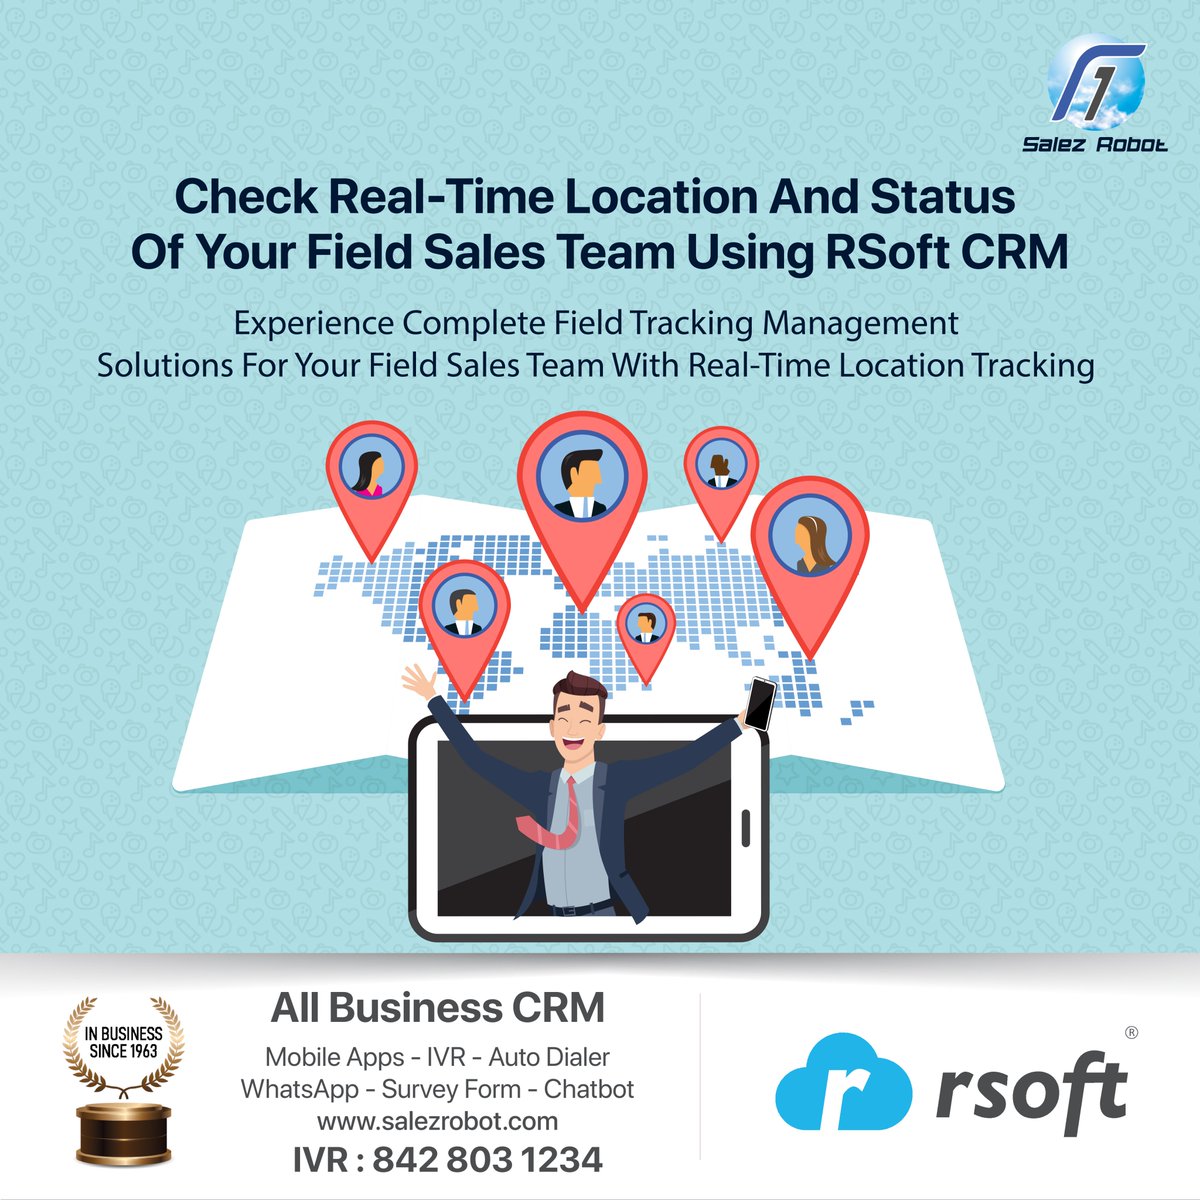 Check Real-Time Location And Status
Of Your Field Sales Team Using RSoft CRM

Signup Your Free Demo Call 842 803 1234 Visit salezrobot.com

#CRMRevolution #FutureOfCRM #DigitalTransformation #CRMInsights
#CustomerExperience #SalesTech #DataDrivenCRM
#CloudCRM